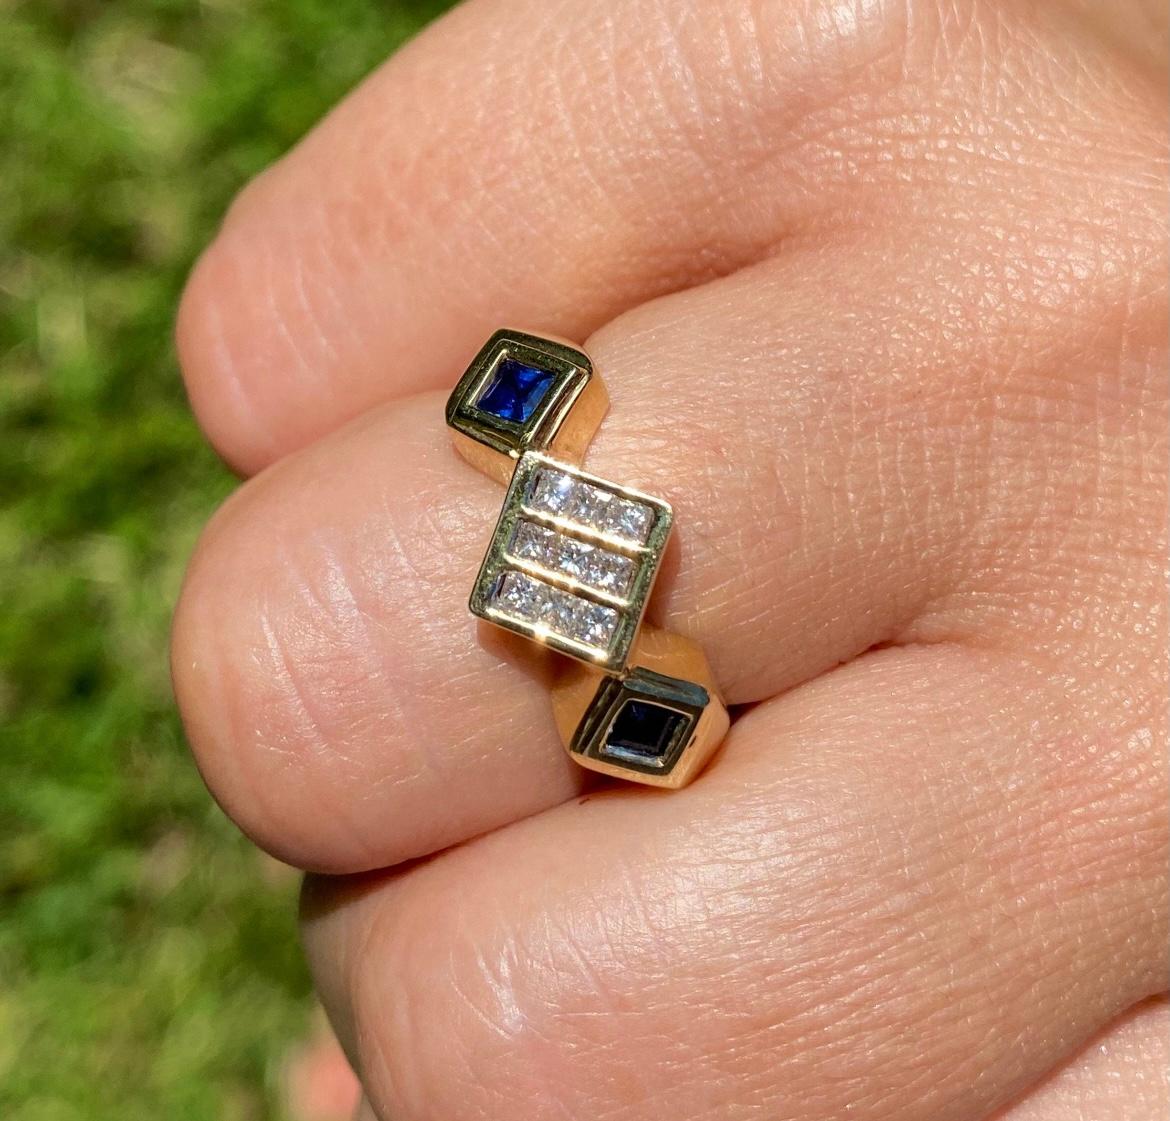 14k gold ring sets 0.40 carats in princess cut diamonds. This unique ring is handmade to suit both men and women, with a trendy geometric ring design and fine quality diamonds/sapphires.

✔ Gold Karat: 14K
✔ Diamond Weight: 9 Diamonds, 0.40 carats